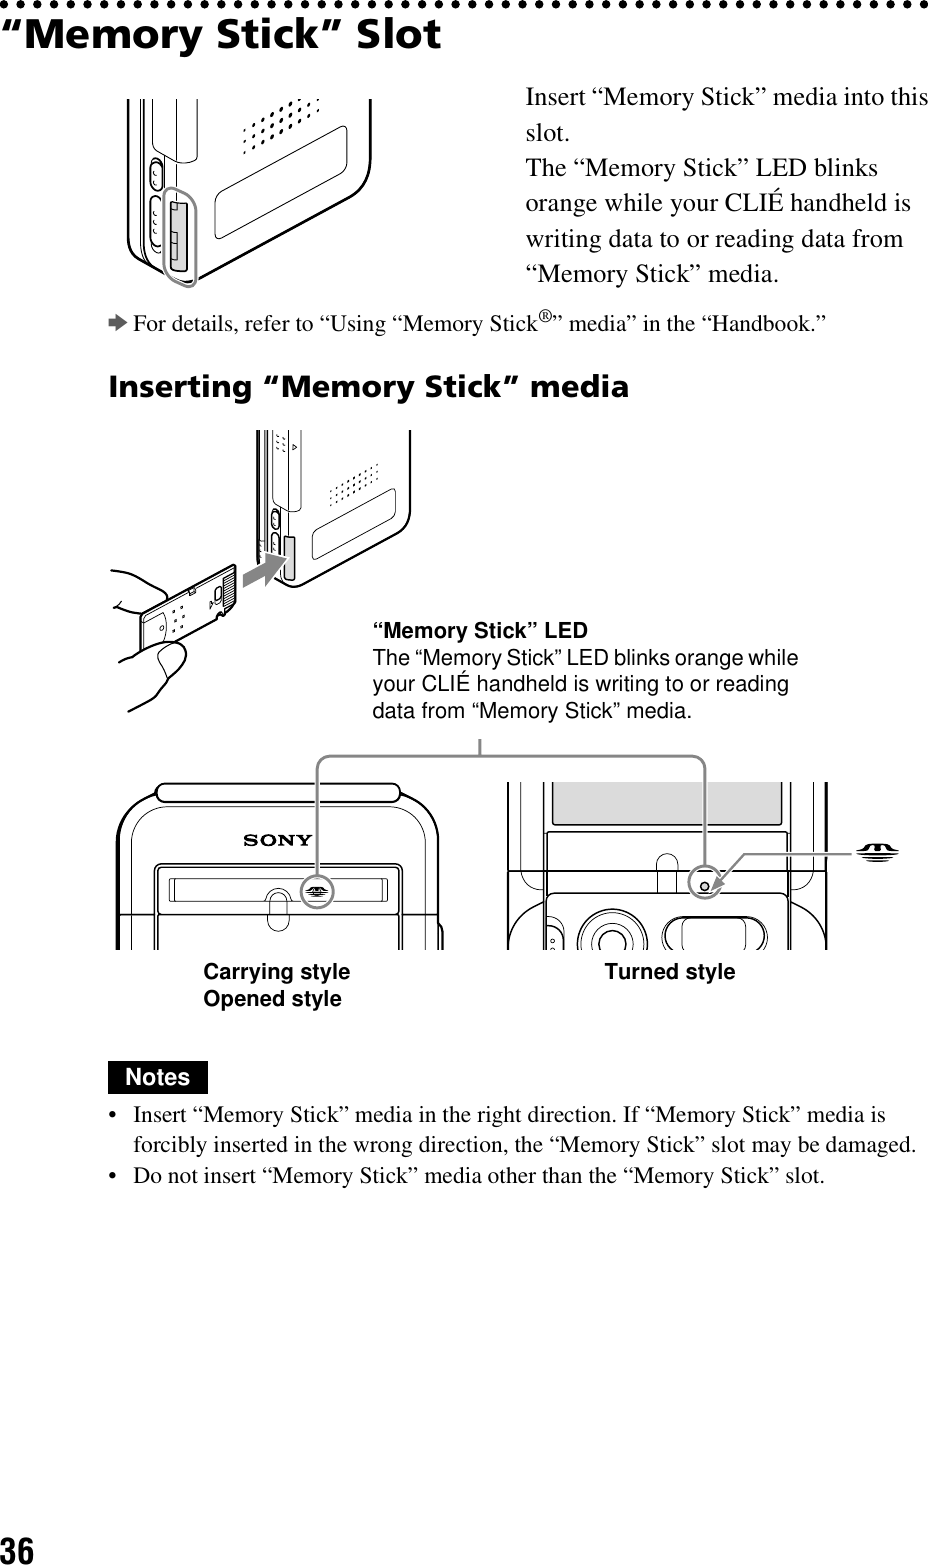 36“Memory Stick” SlotbFor details, refer to “Using “Memory Stick®” media” in the “Handbook.”Inserting “Memory Stick” mediaNotes• Insert “Memory Stick” media in the right direction. If “Memory Stick” media is forcibly inserted in the wrong direction, the “Memory Stick” slot may be damaged.• Do not insert “Memory Stick” media other than the “Memory Stick” slot.Insert “Memory Stick” media into this slot.The “Memory Stick” LED blinks orange while your CLIÉ handheld is writing data to or reading data from “Memory Stick” media.“Memory Stick” LEDThe “Memory Stick” LED blinks orange while your CLIÉ handheld is writing to or reading data from “Memory Stick” media.Carrying styleOpened style Turned style